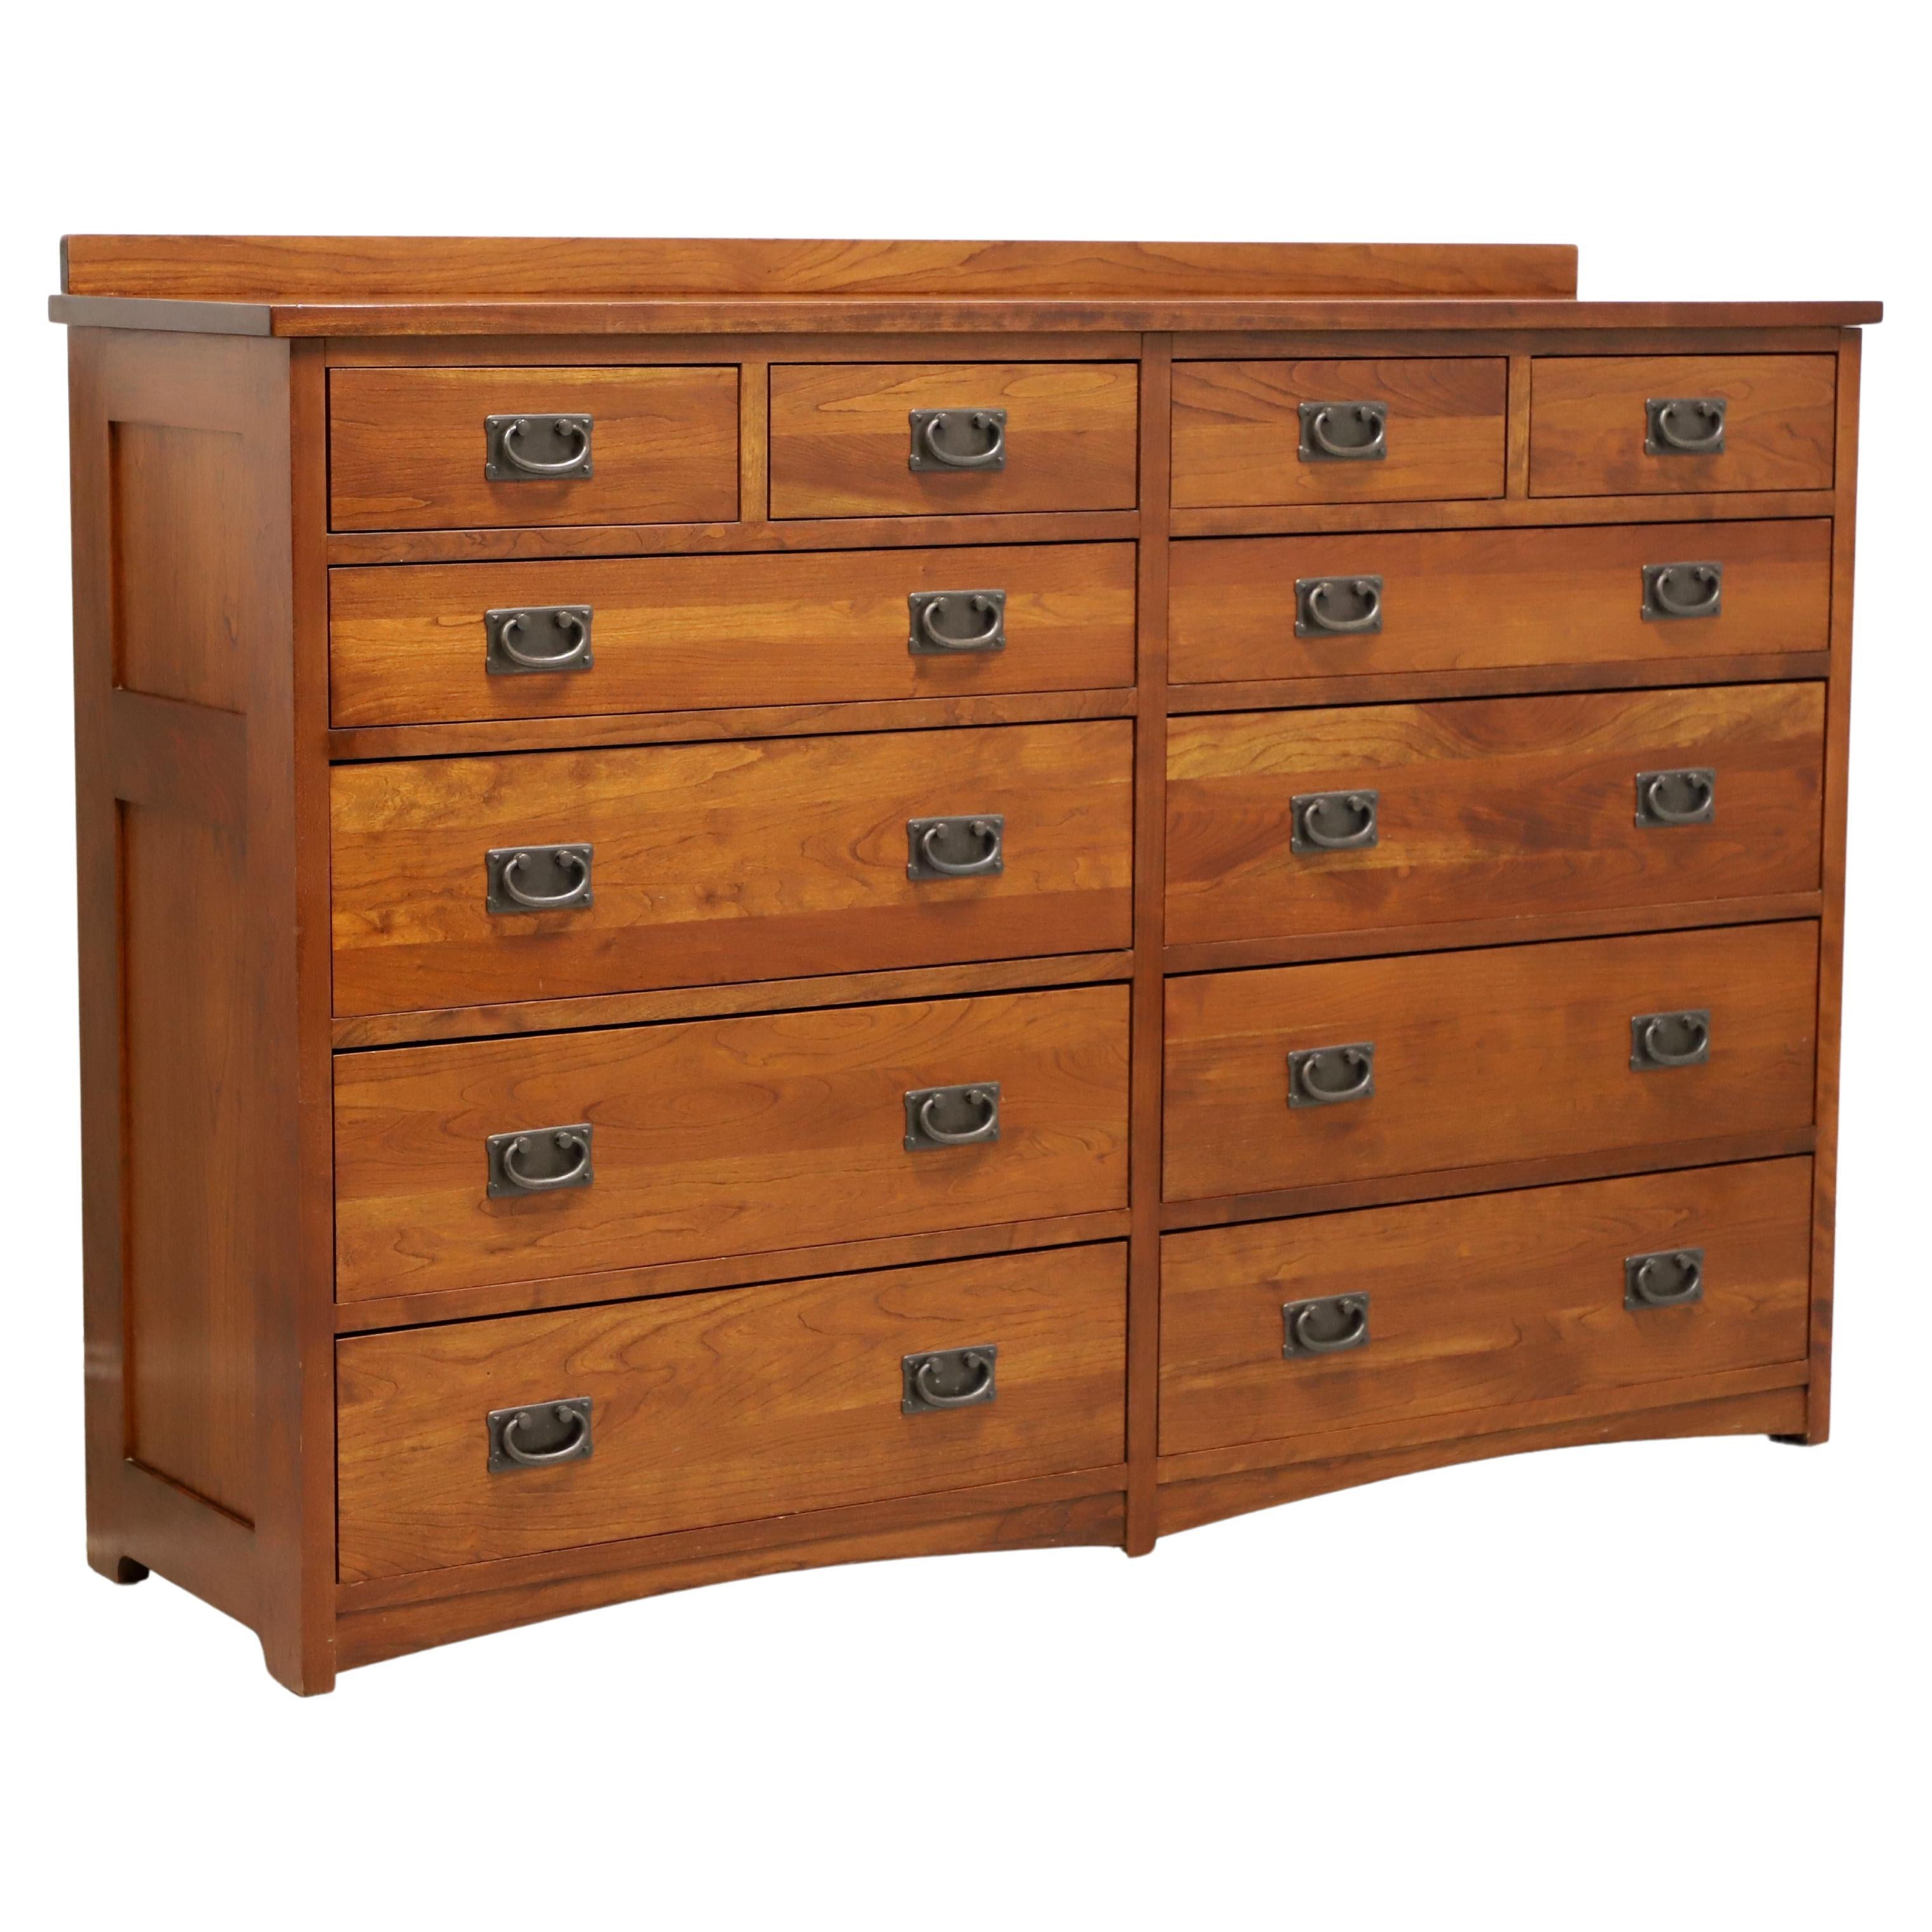 MICHEAL'S MISSION by MILLER Cherry Arts & Crafts Mule Chest with Cedar Drawers